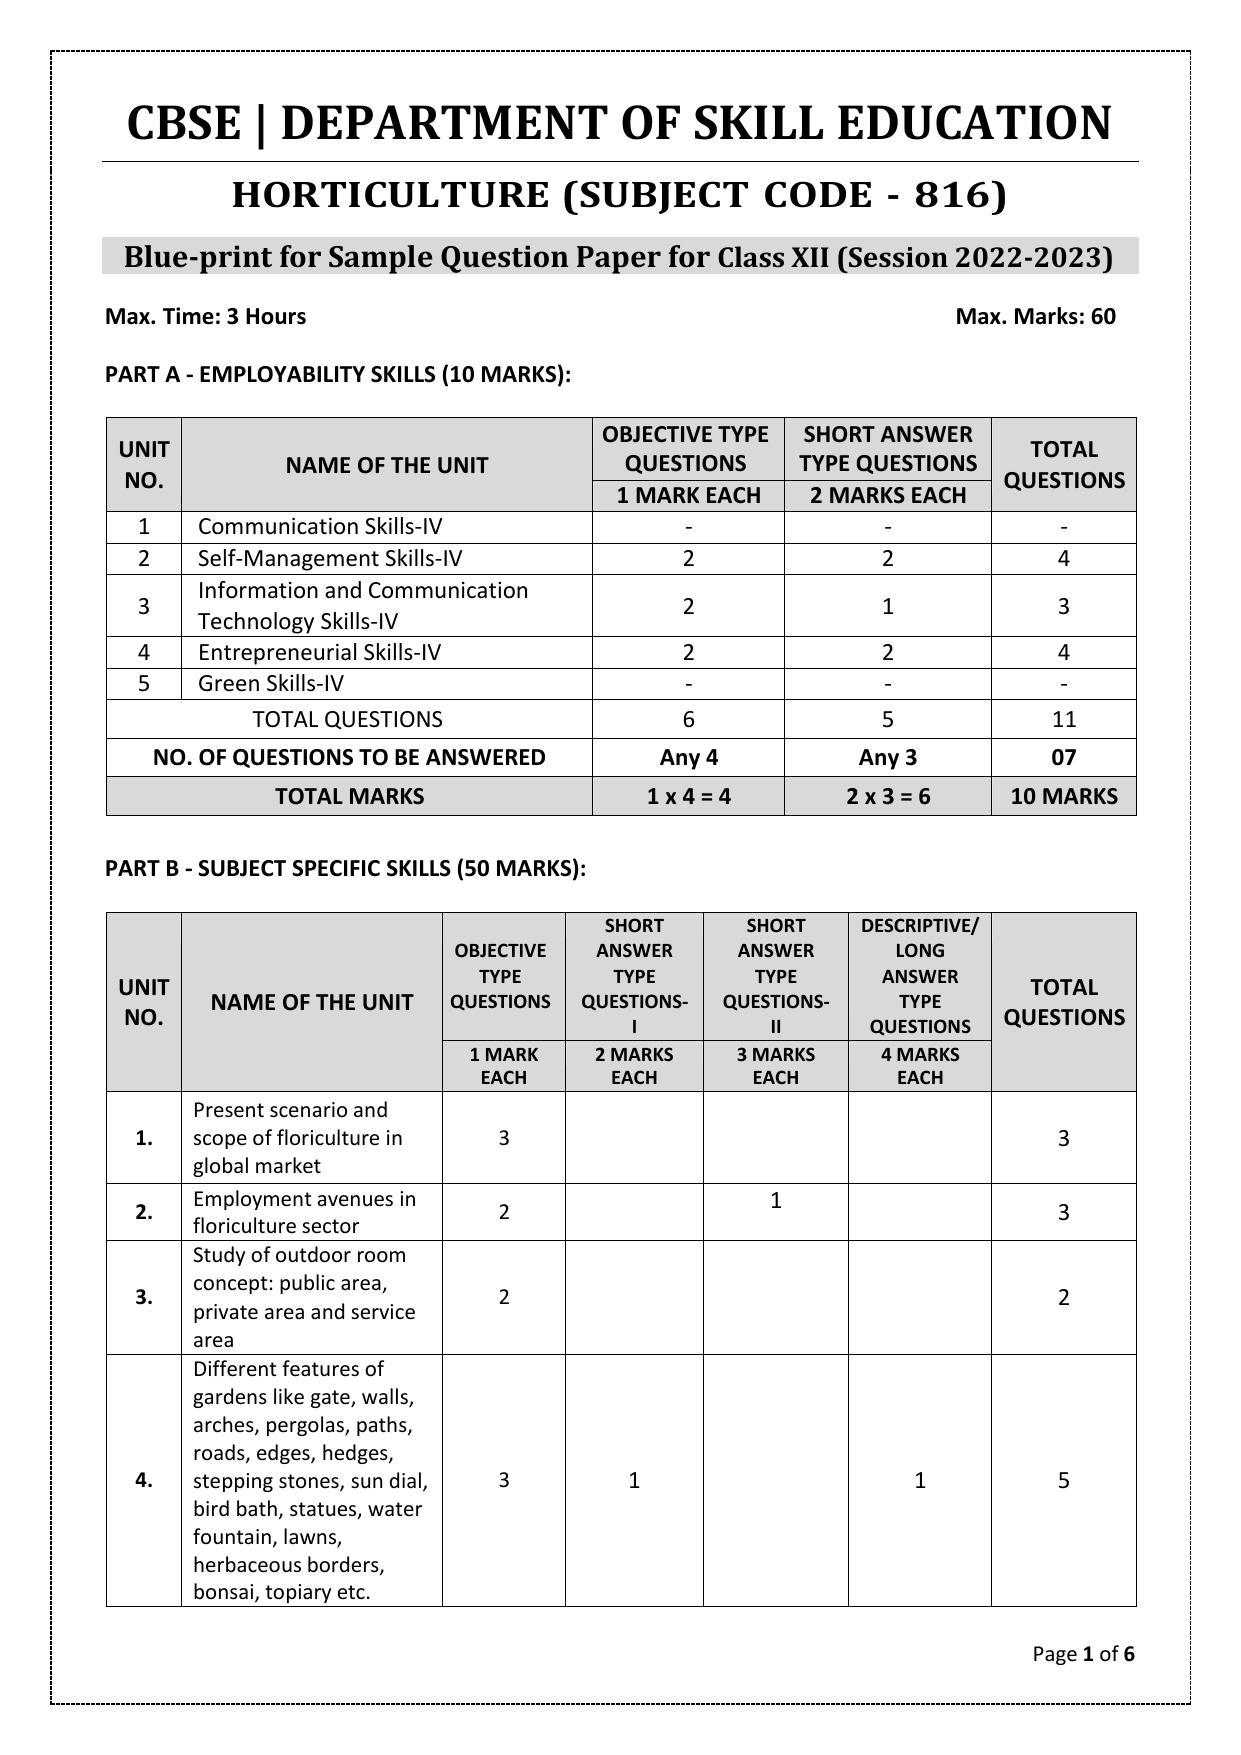 CBSE Class 10 Horticulture (Skill Education) Sample Papers 2023 - Page 1